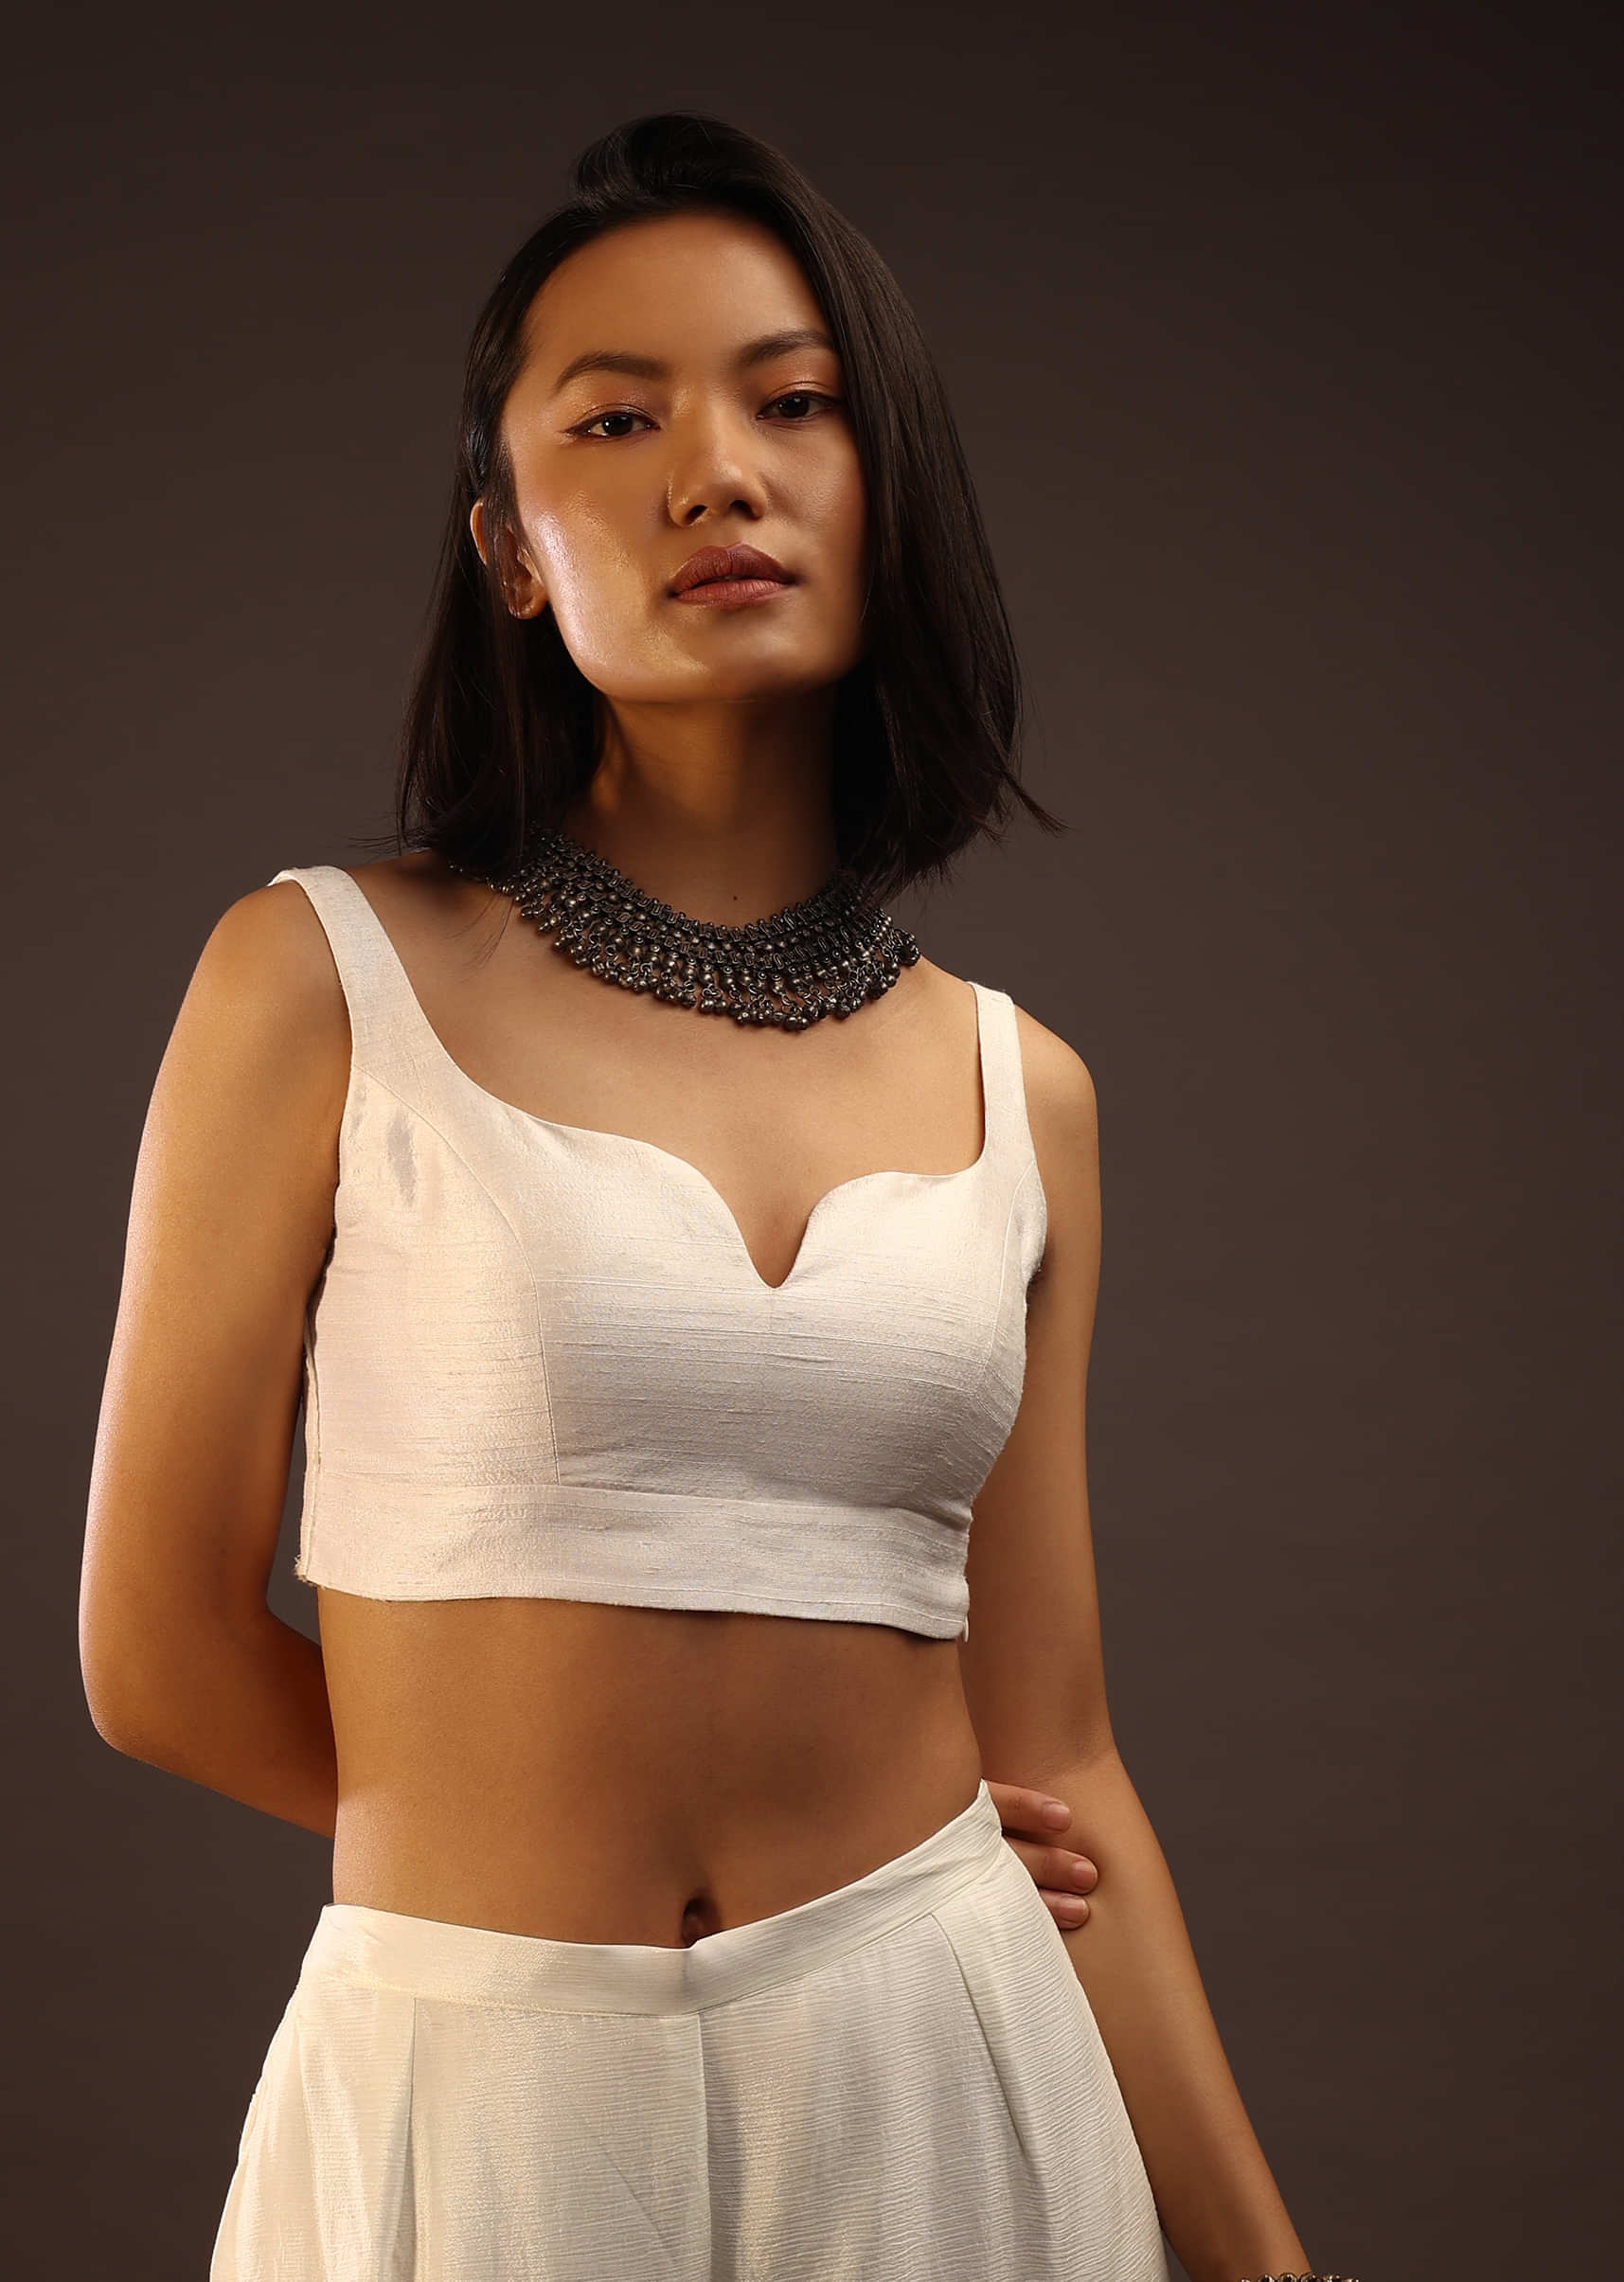 Egret White  Sleeveless Blouse With A Sweetheart Neckline. Padded With A Back Hook Closure